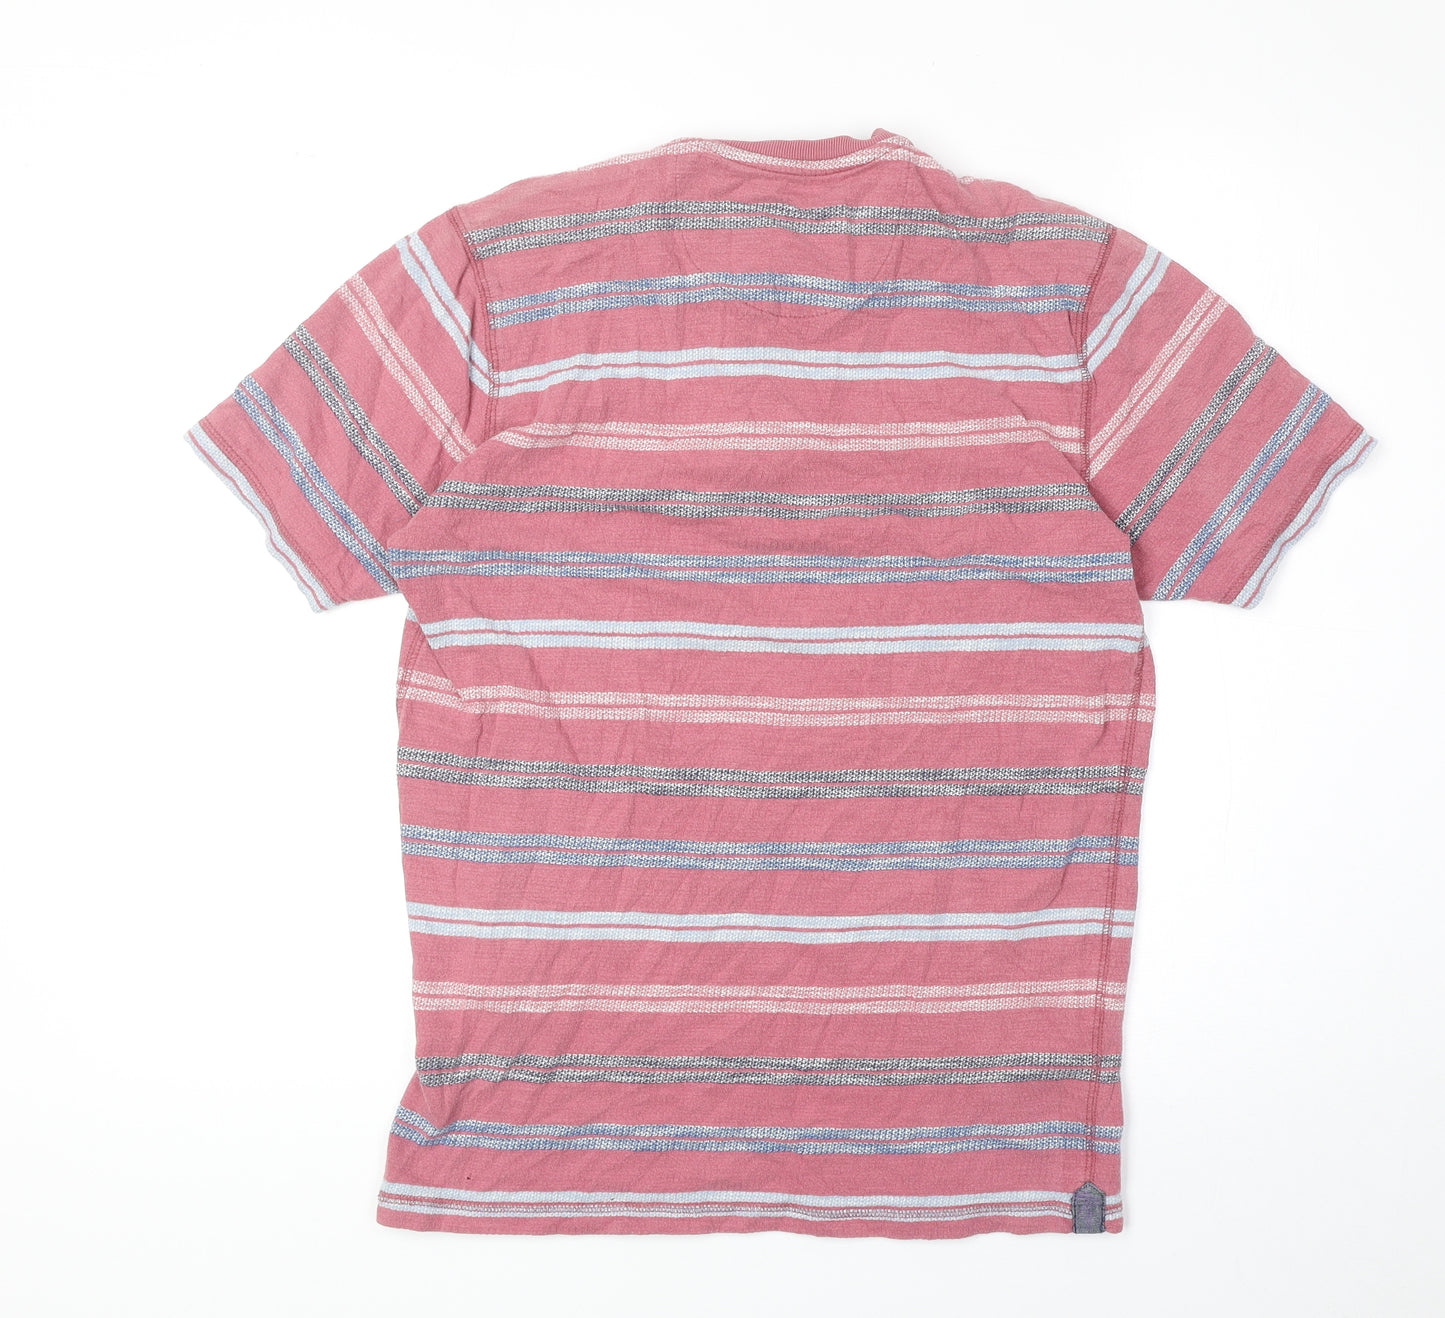 North Coast Mens Red Striped Cotton T-Shirt Size S Round Neck